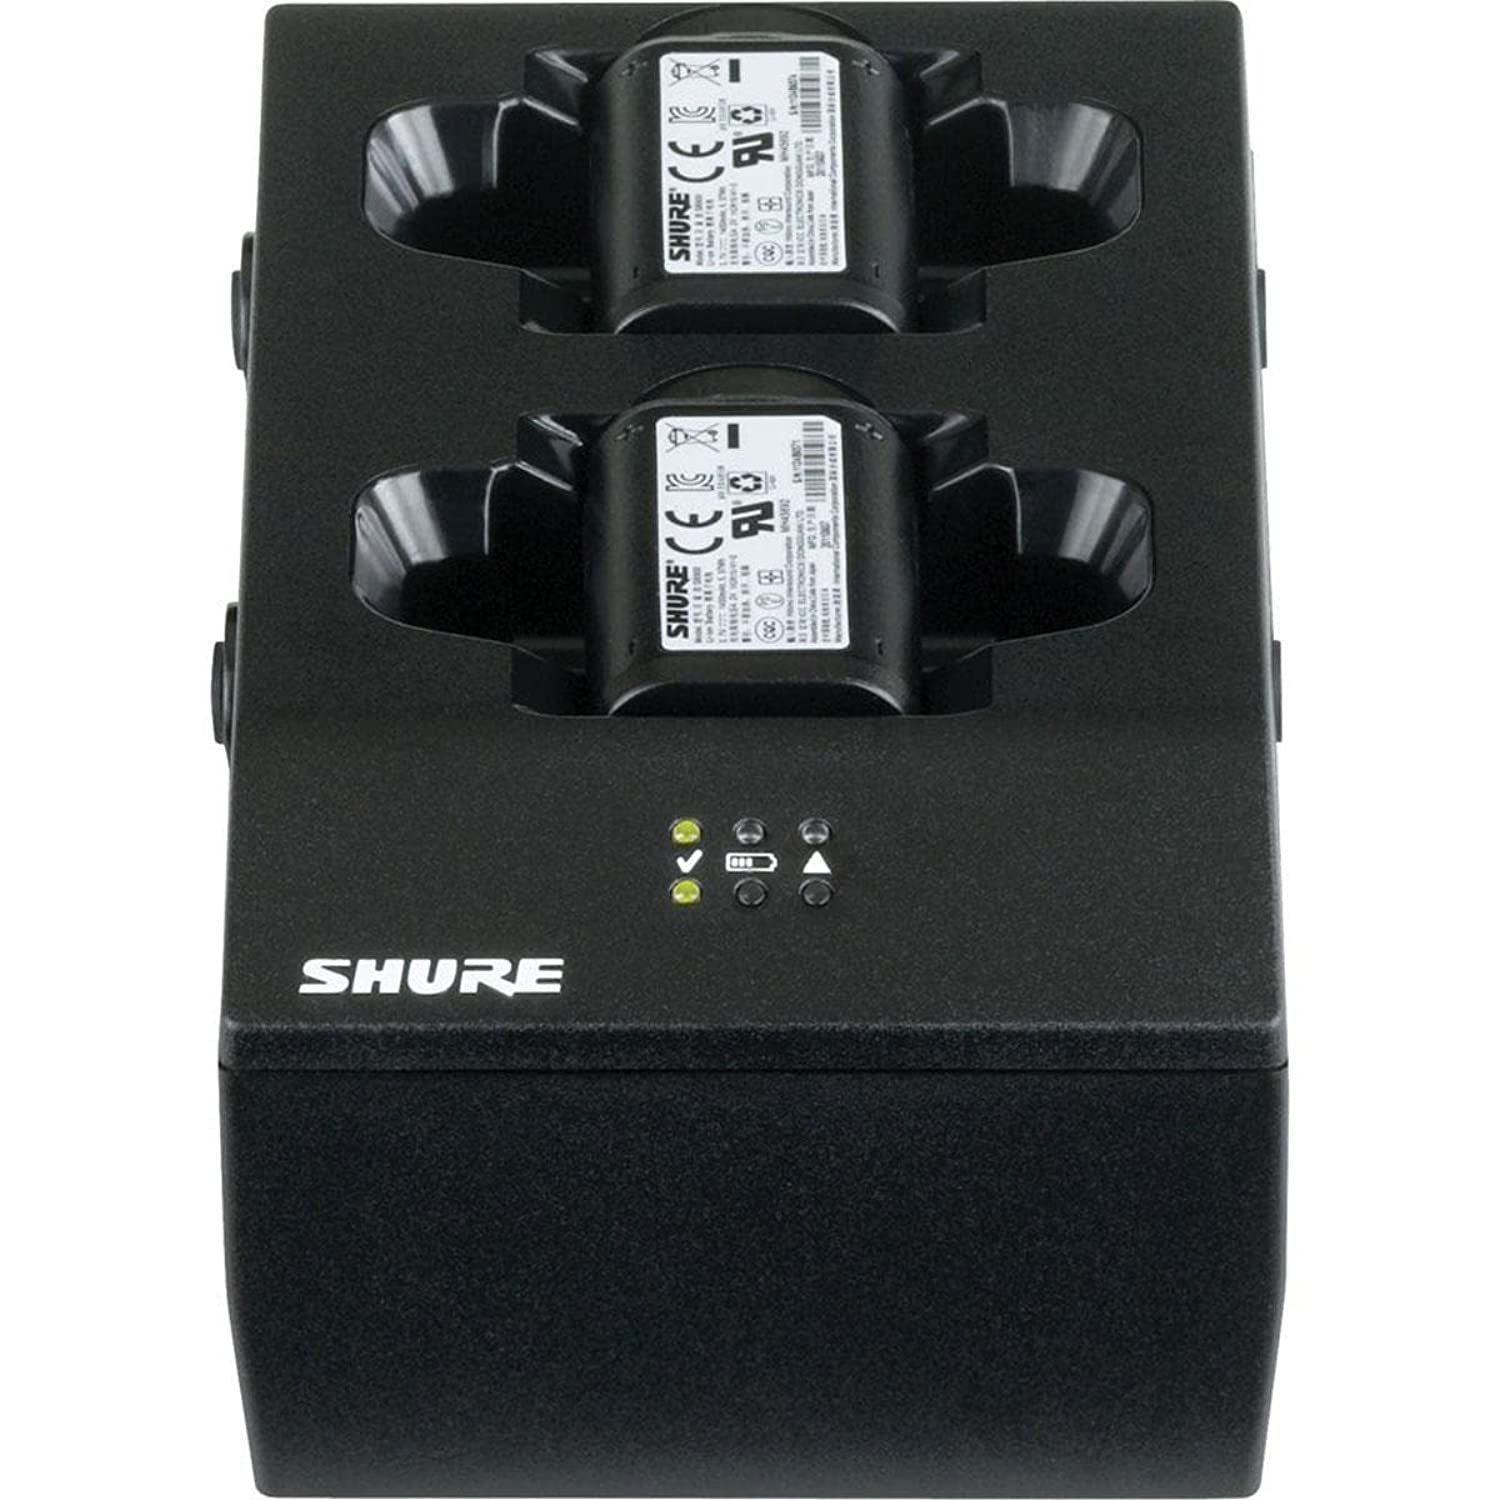 Shure SBC200-US Dual Docking Charger with PS45US Power Supply, Recharging Statio